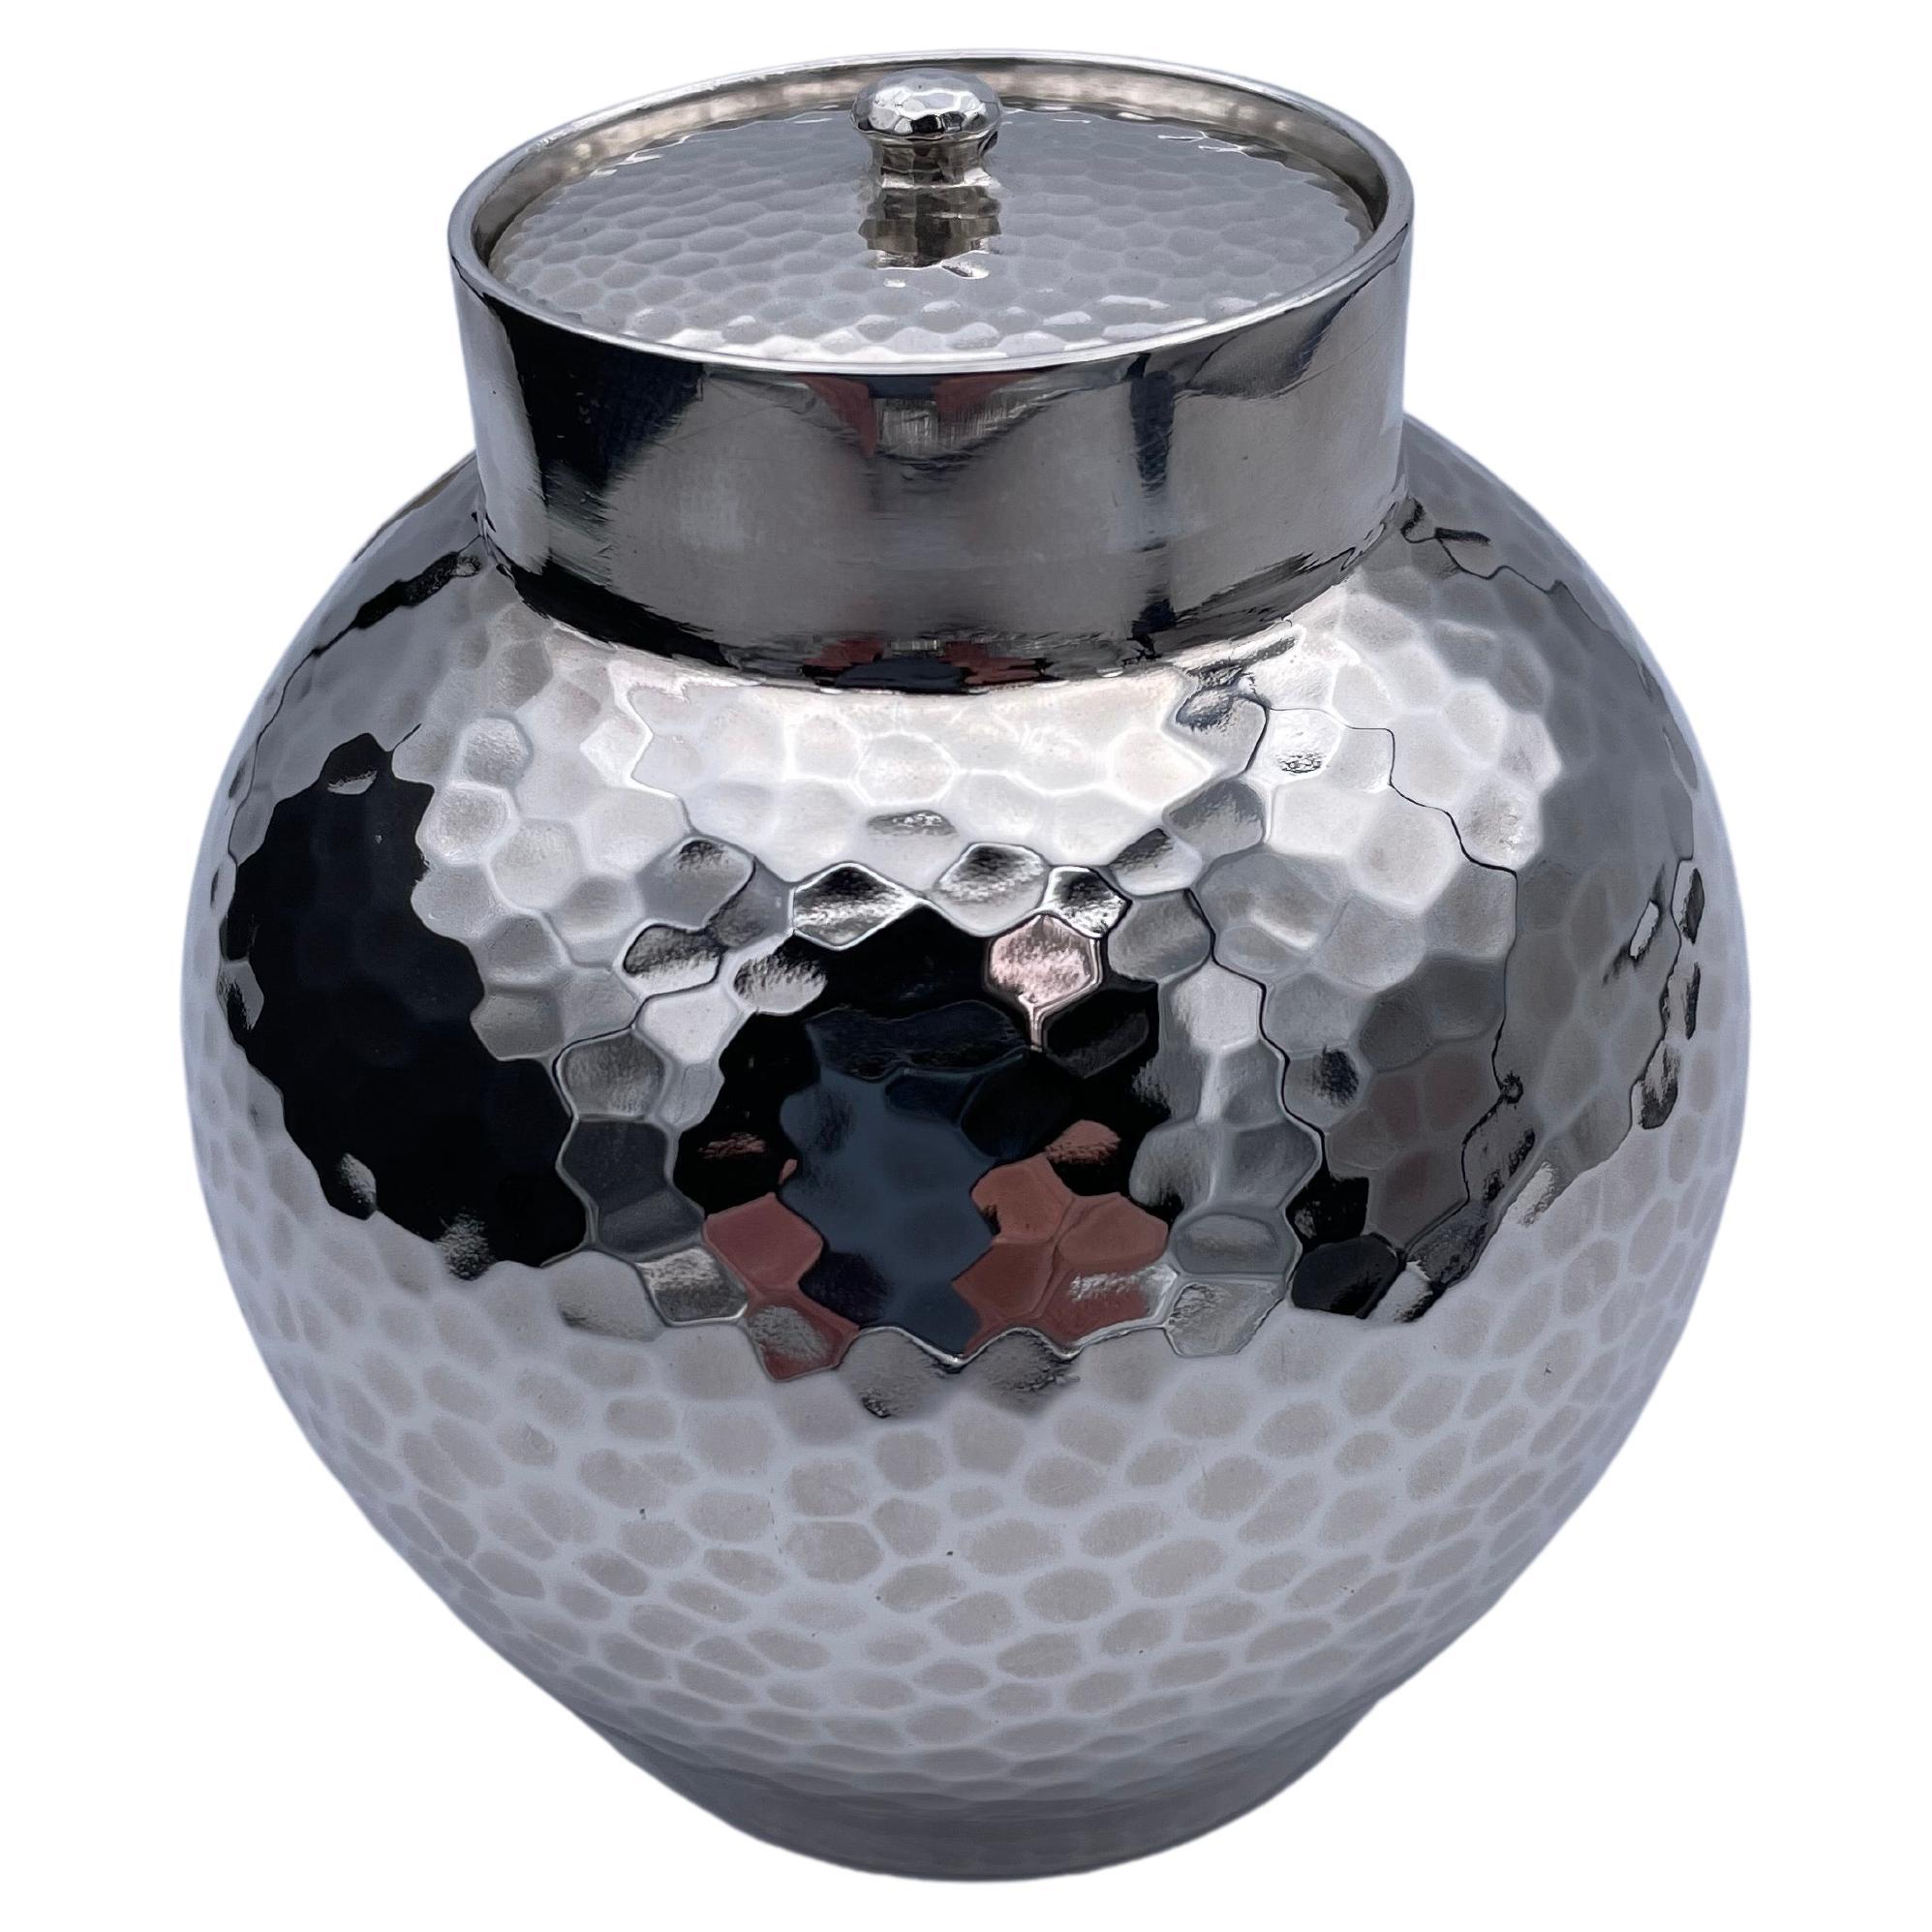 Outstanding tea caddy or covered jar. Made by Tiffany & Co. Solid gauge sterling silver with an allover deep hand-hammered finish. 
A graceful rounded shape. It has a separate lid with a small knob. 4 1/2